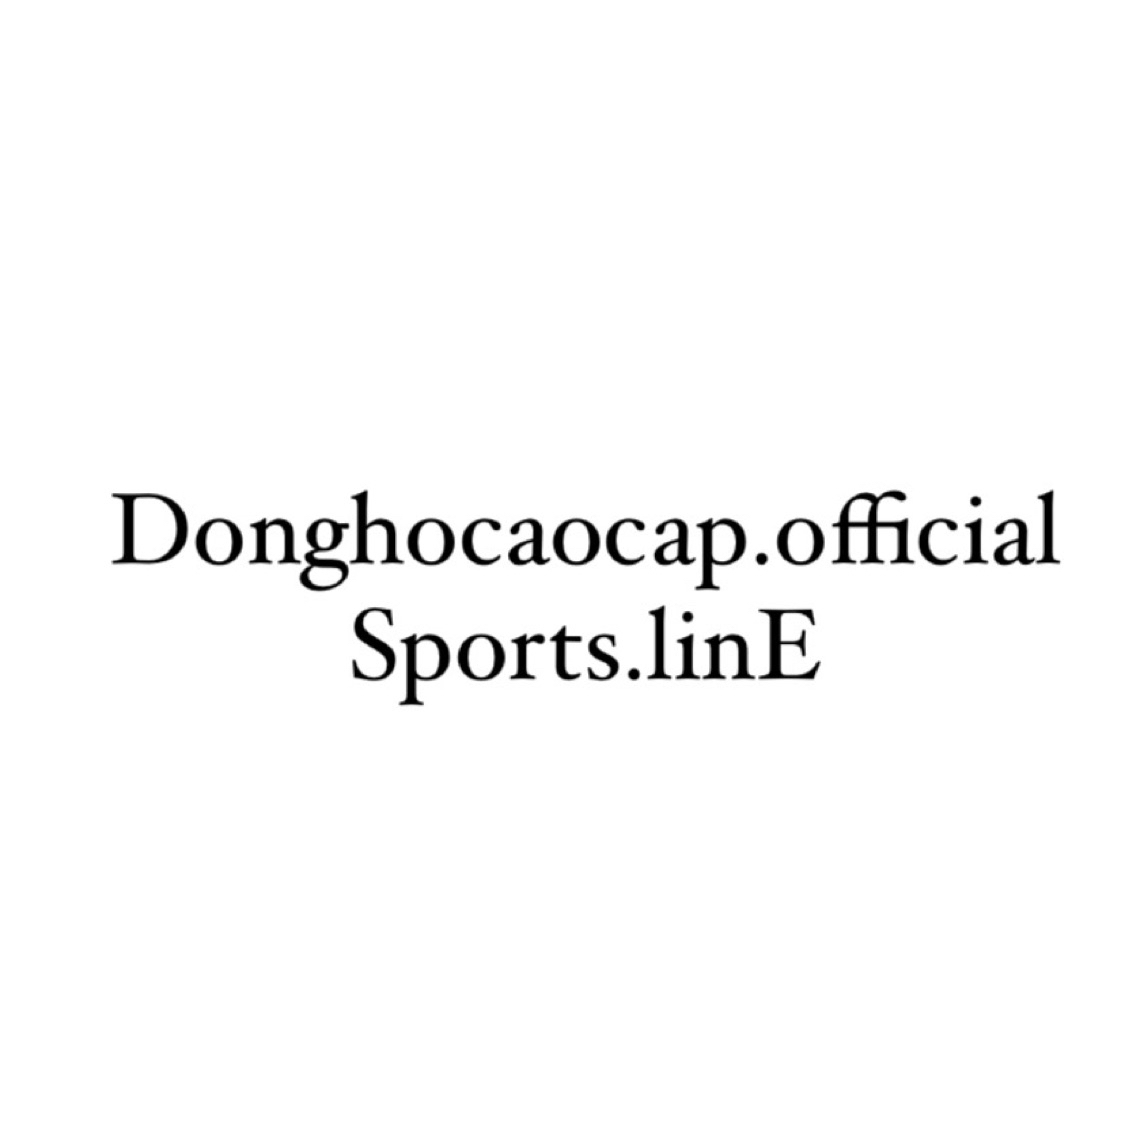 Donghocaocap.official